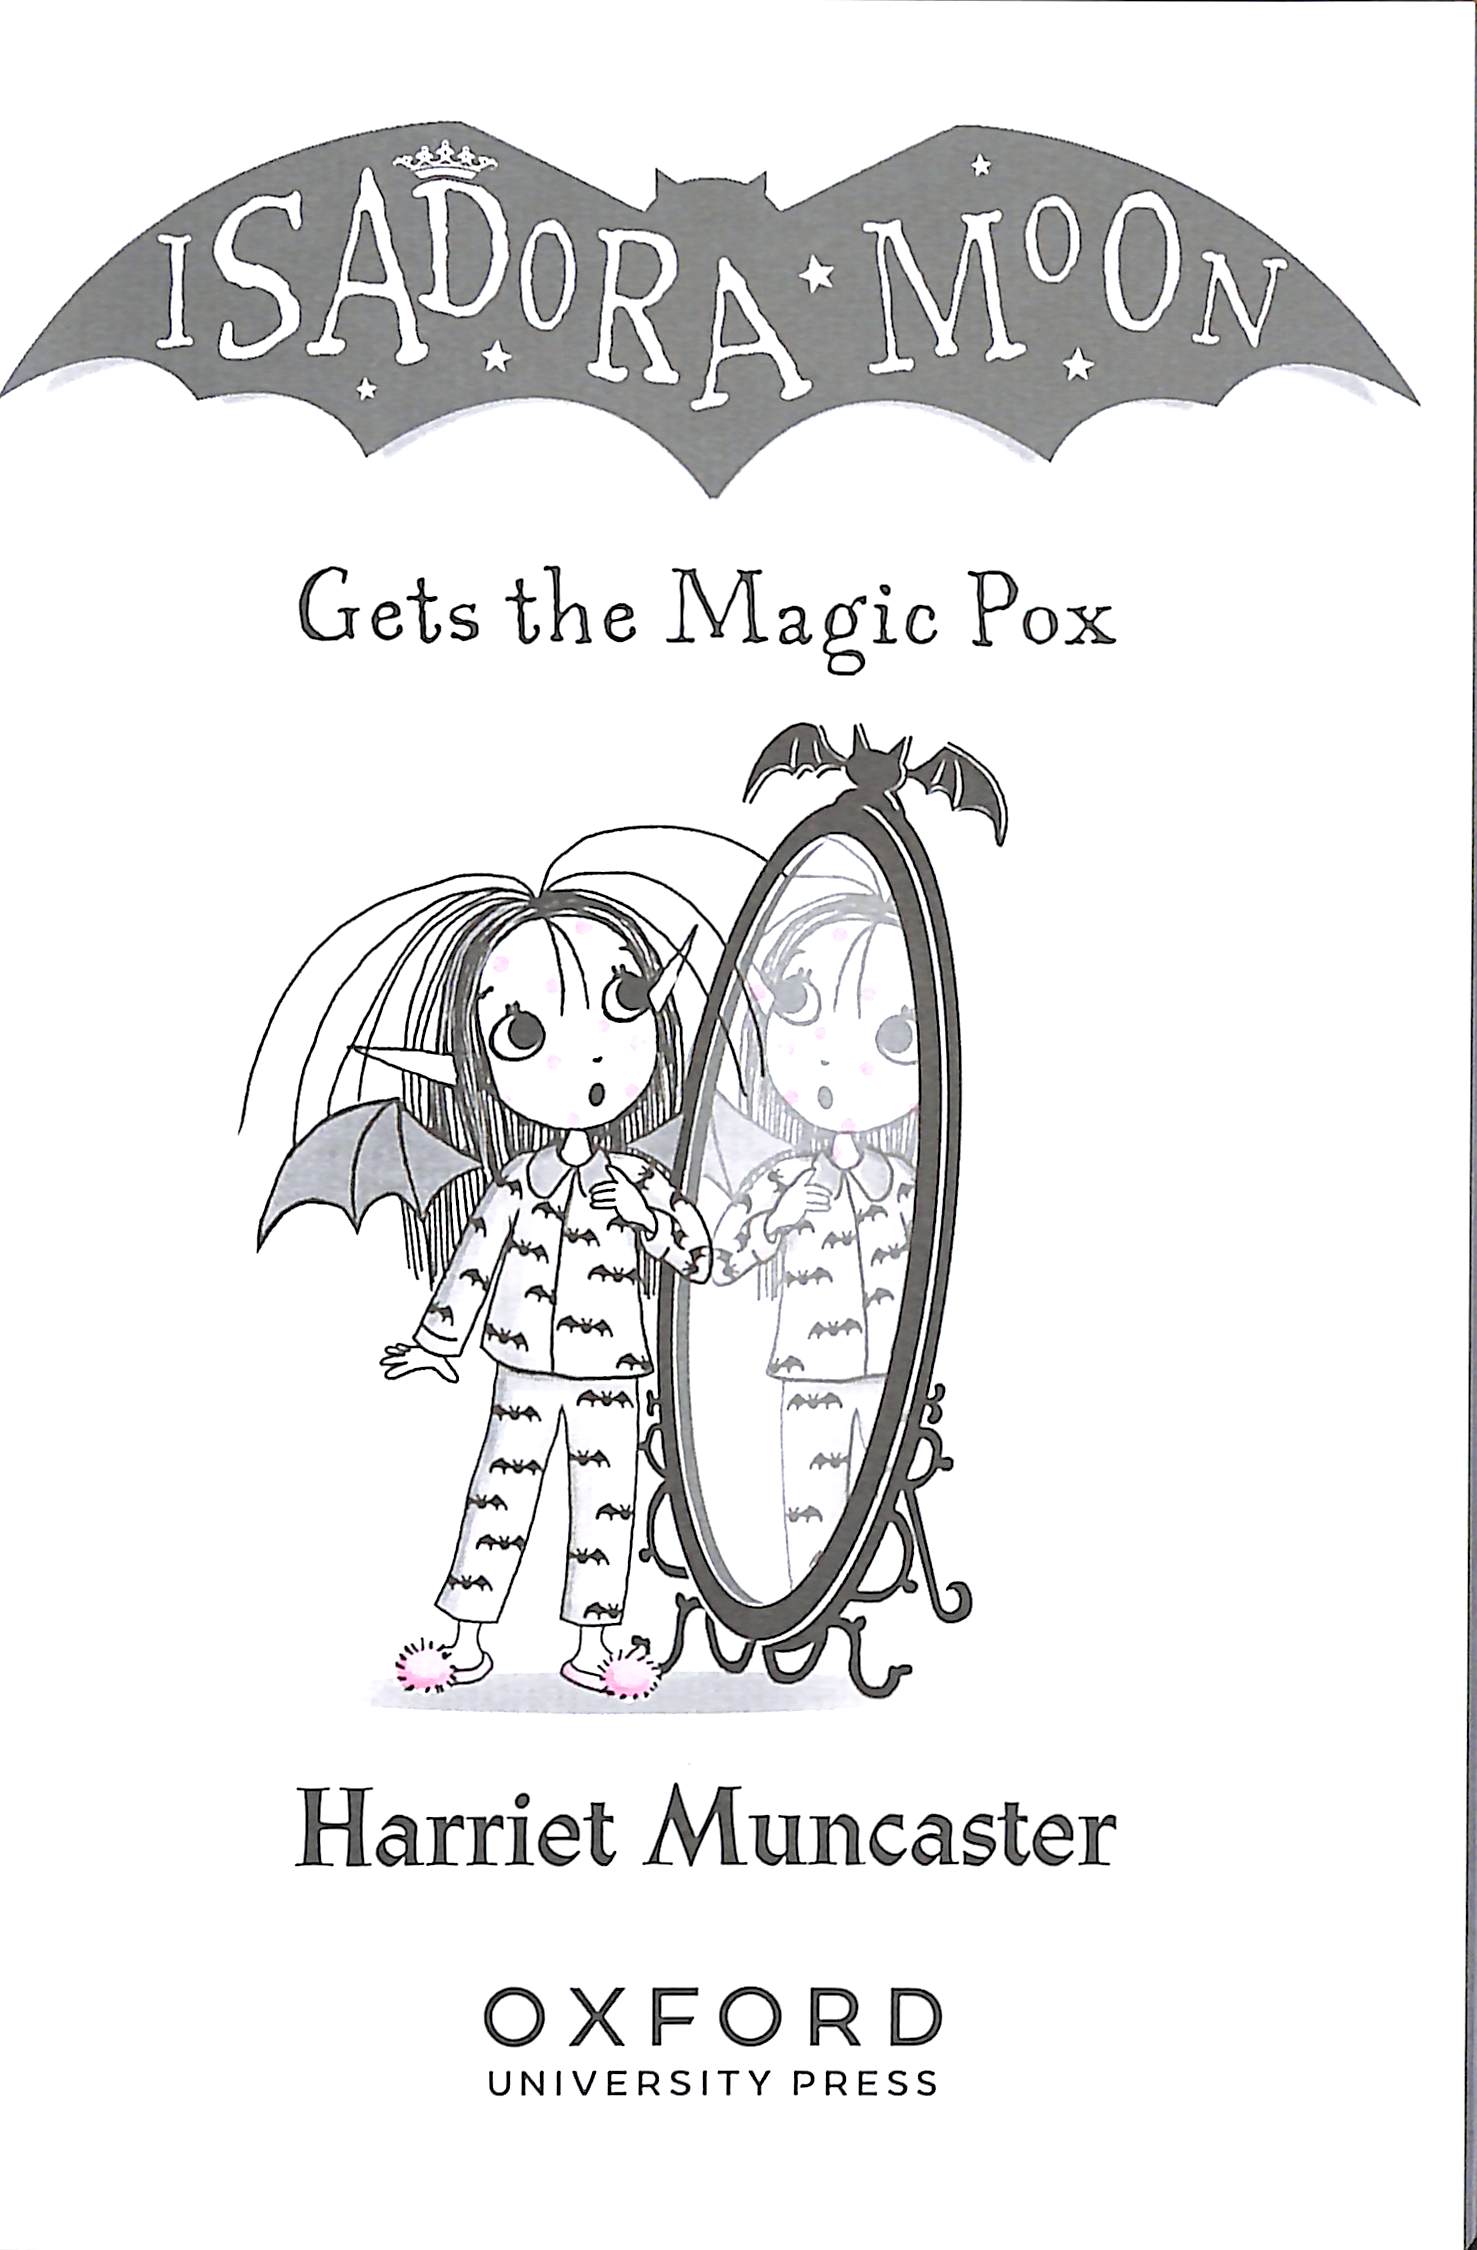 Isadora Moon gets the magic pox by Harriet Muncaster